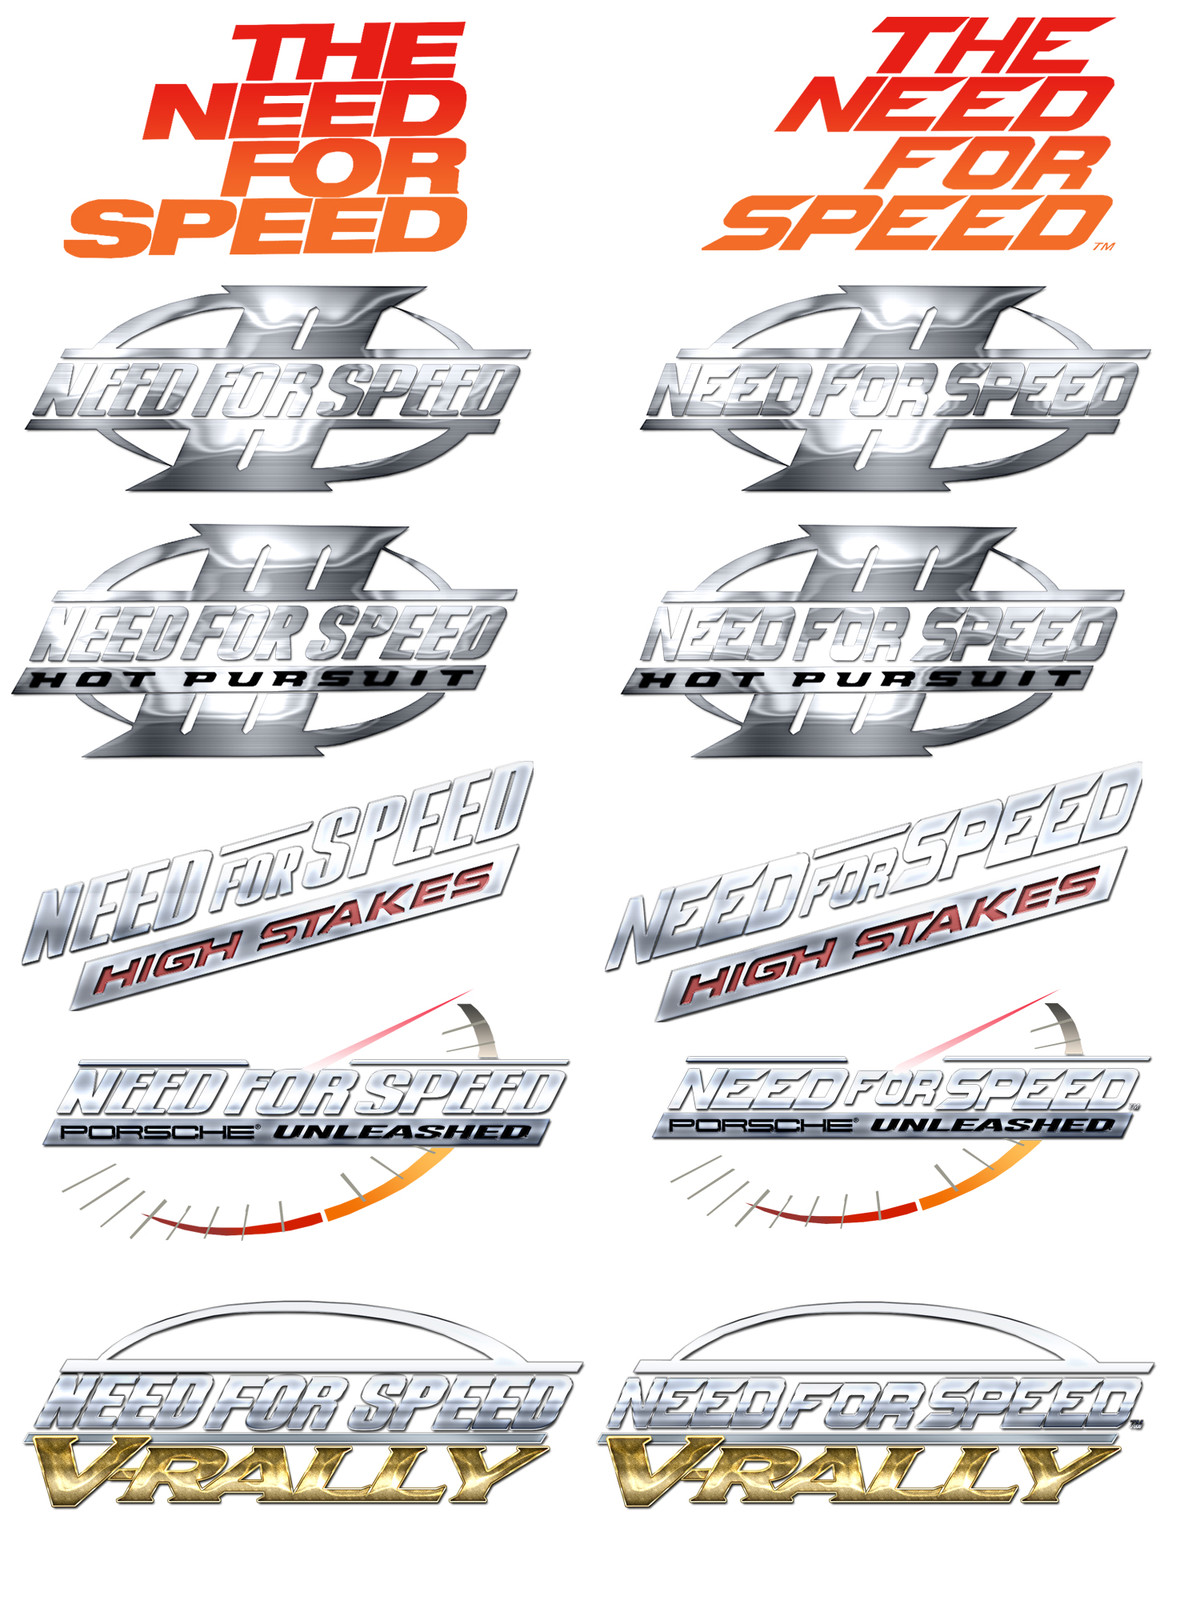 Need for Speed first generation comparison.